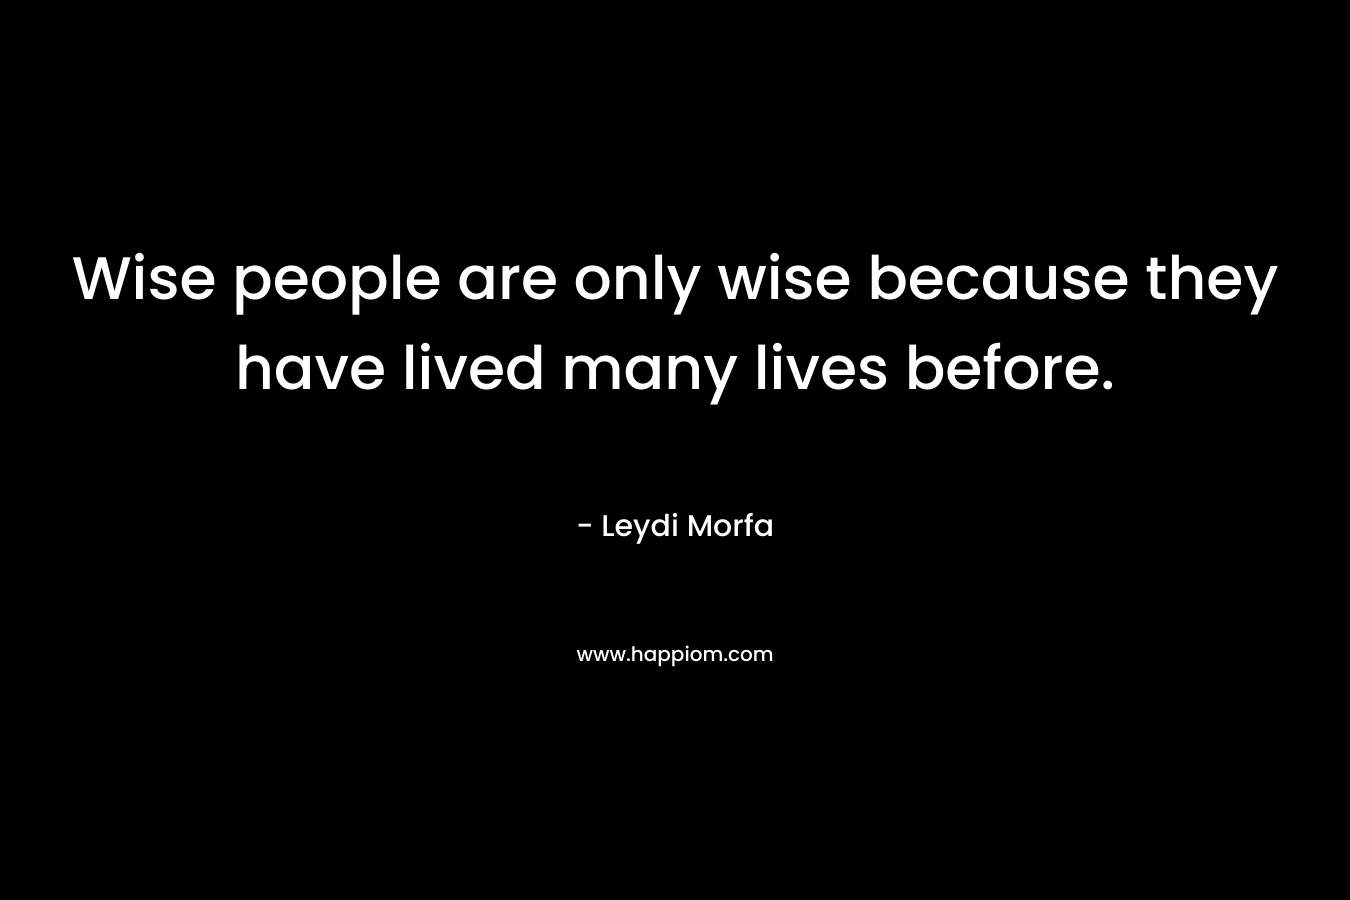 Wise people are only wise because they have lived many lives before. – Leydi Morfa